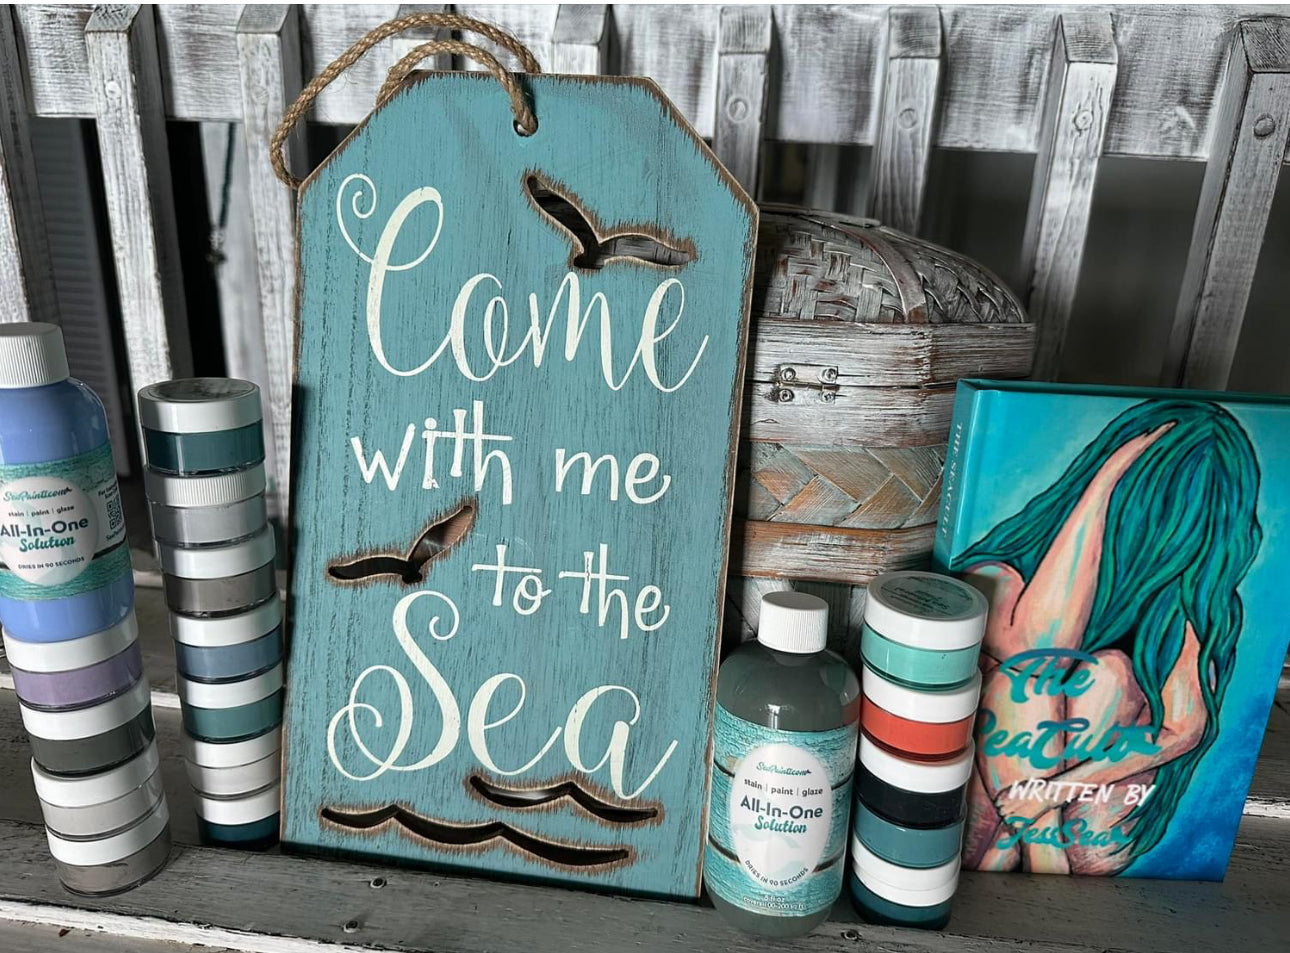 Come with me to the sea set - free $23 gift included (not pictured)